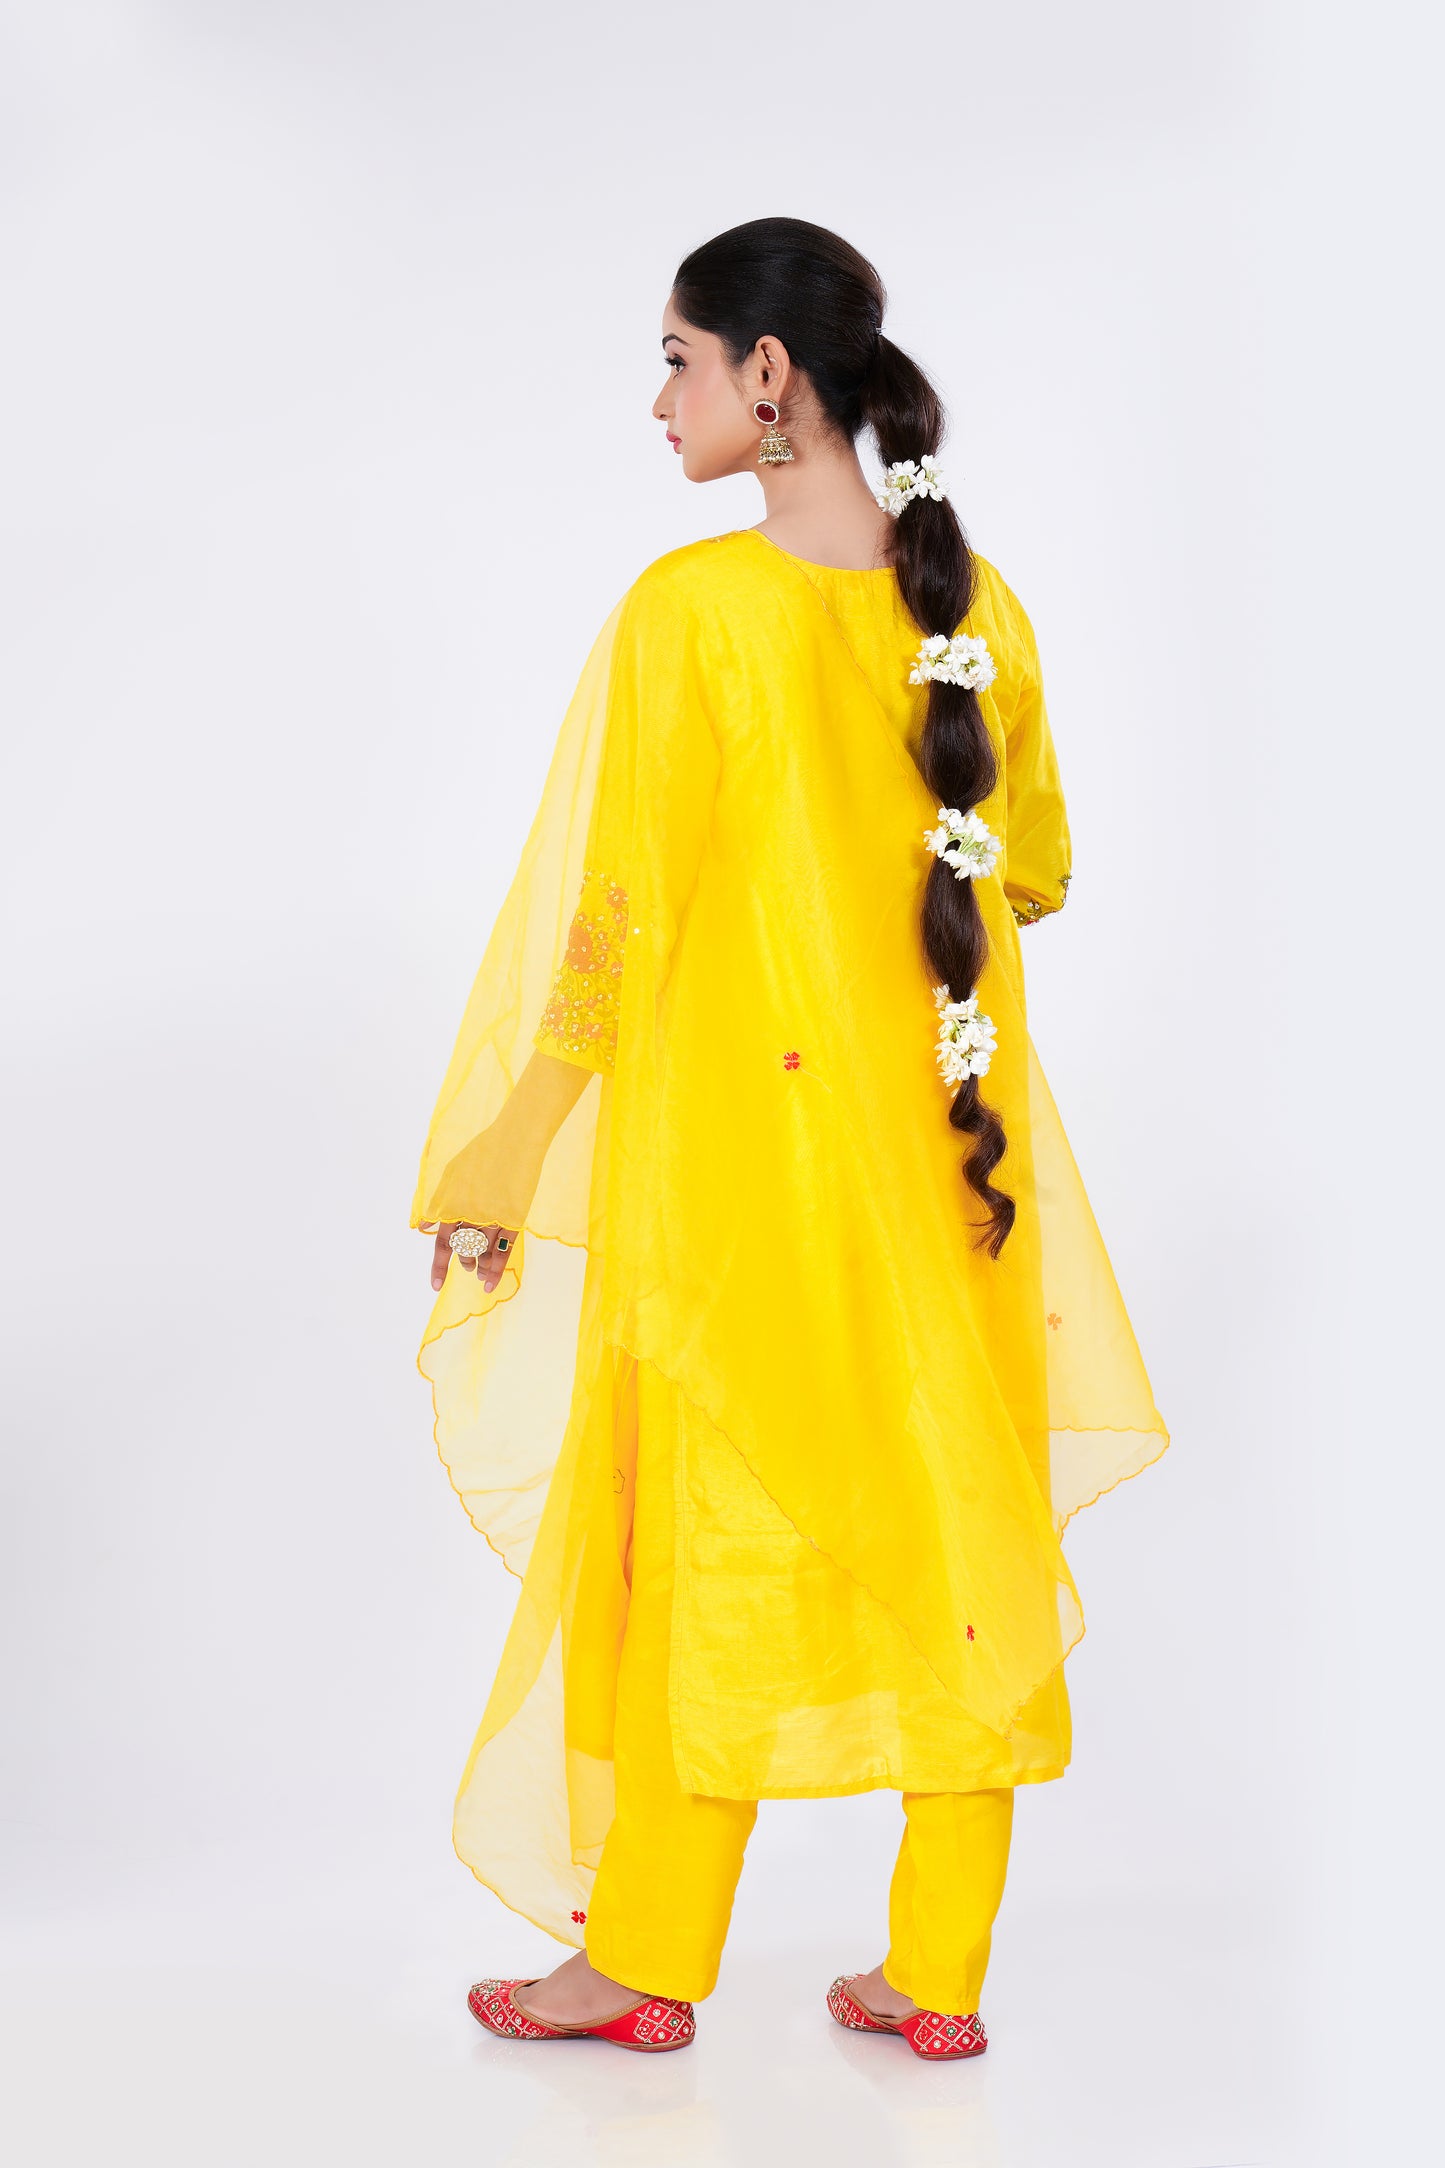 Straight Kurta Set with Organza Dupatta is made from luxurious Dola Silk and Hand Embroidery in Yellow Colour